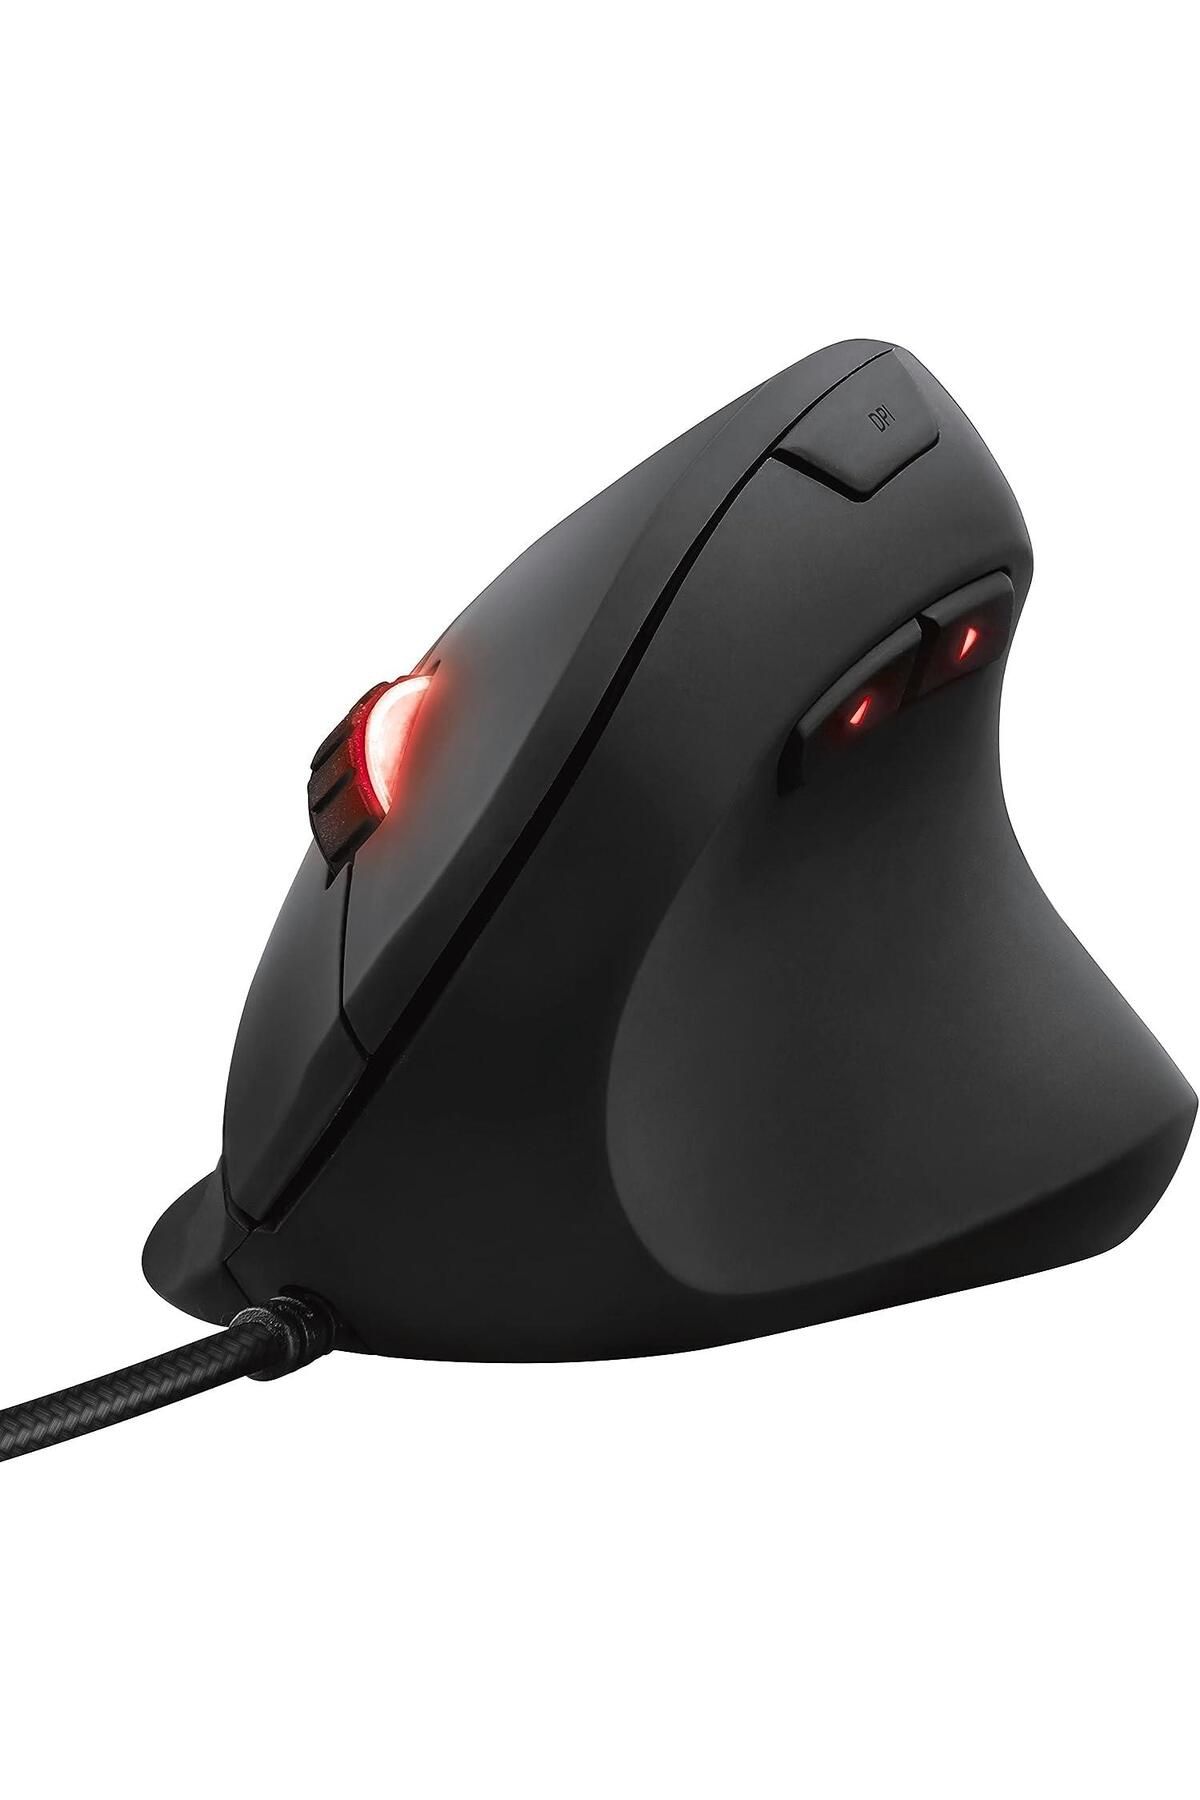 Trust GXT144 Rexx Ergo Gaming Mouse-Syh